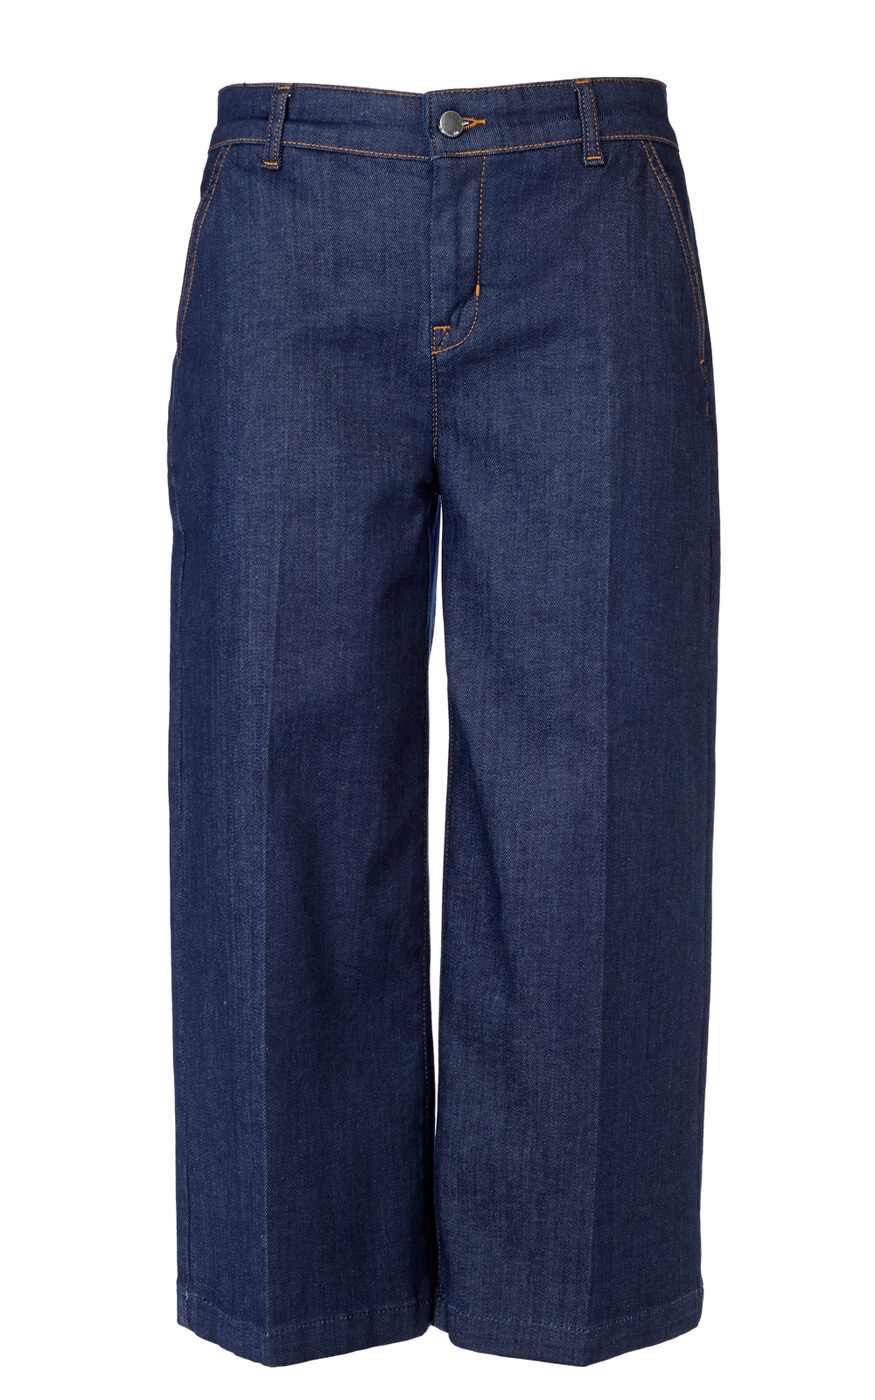 Cocomamastyle | Pick of the week | denim culottes | karen millen | AW15